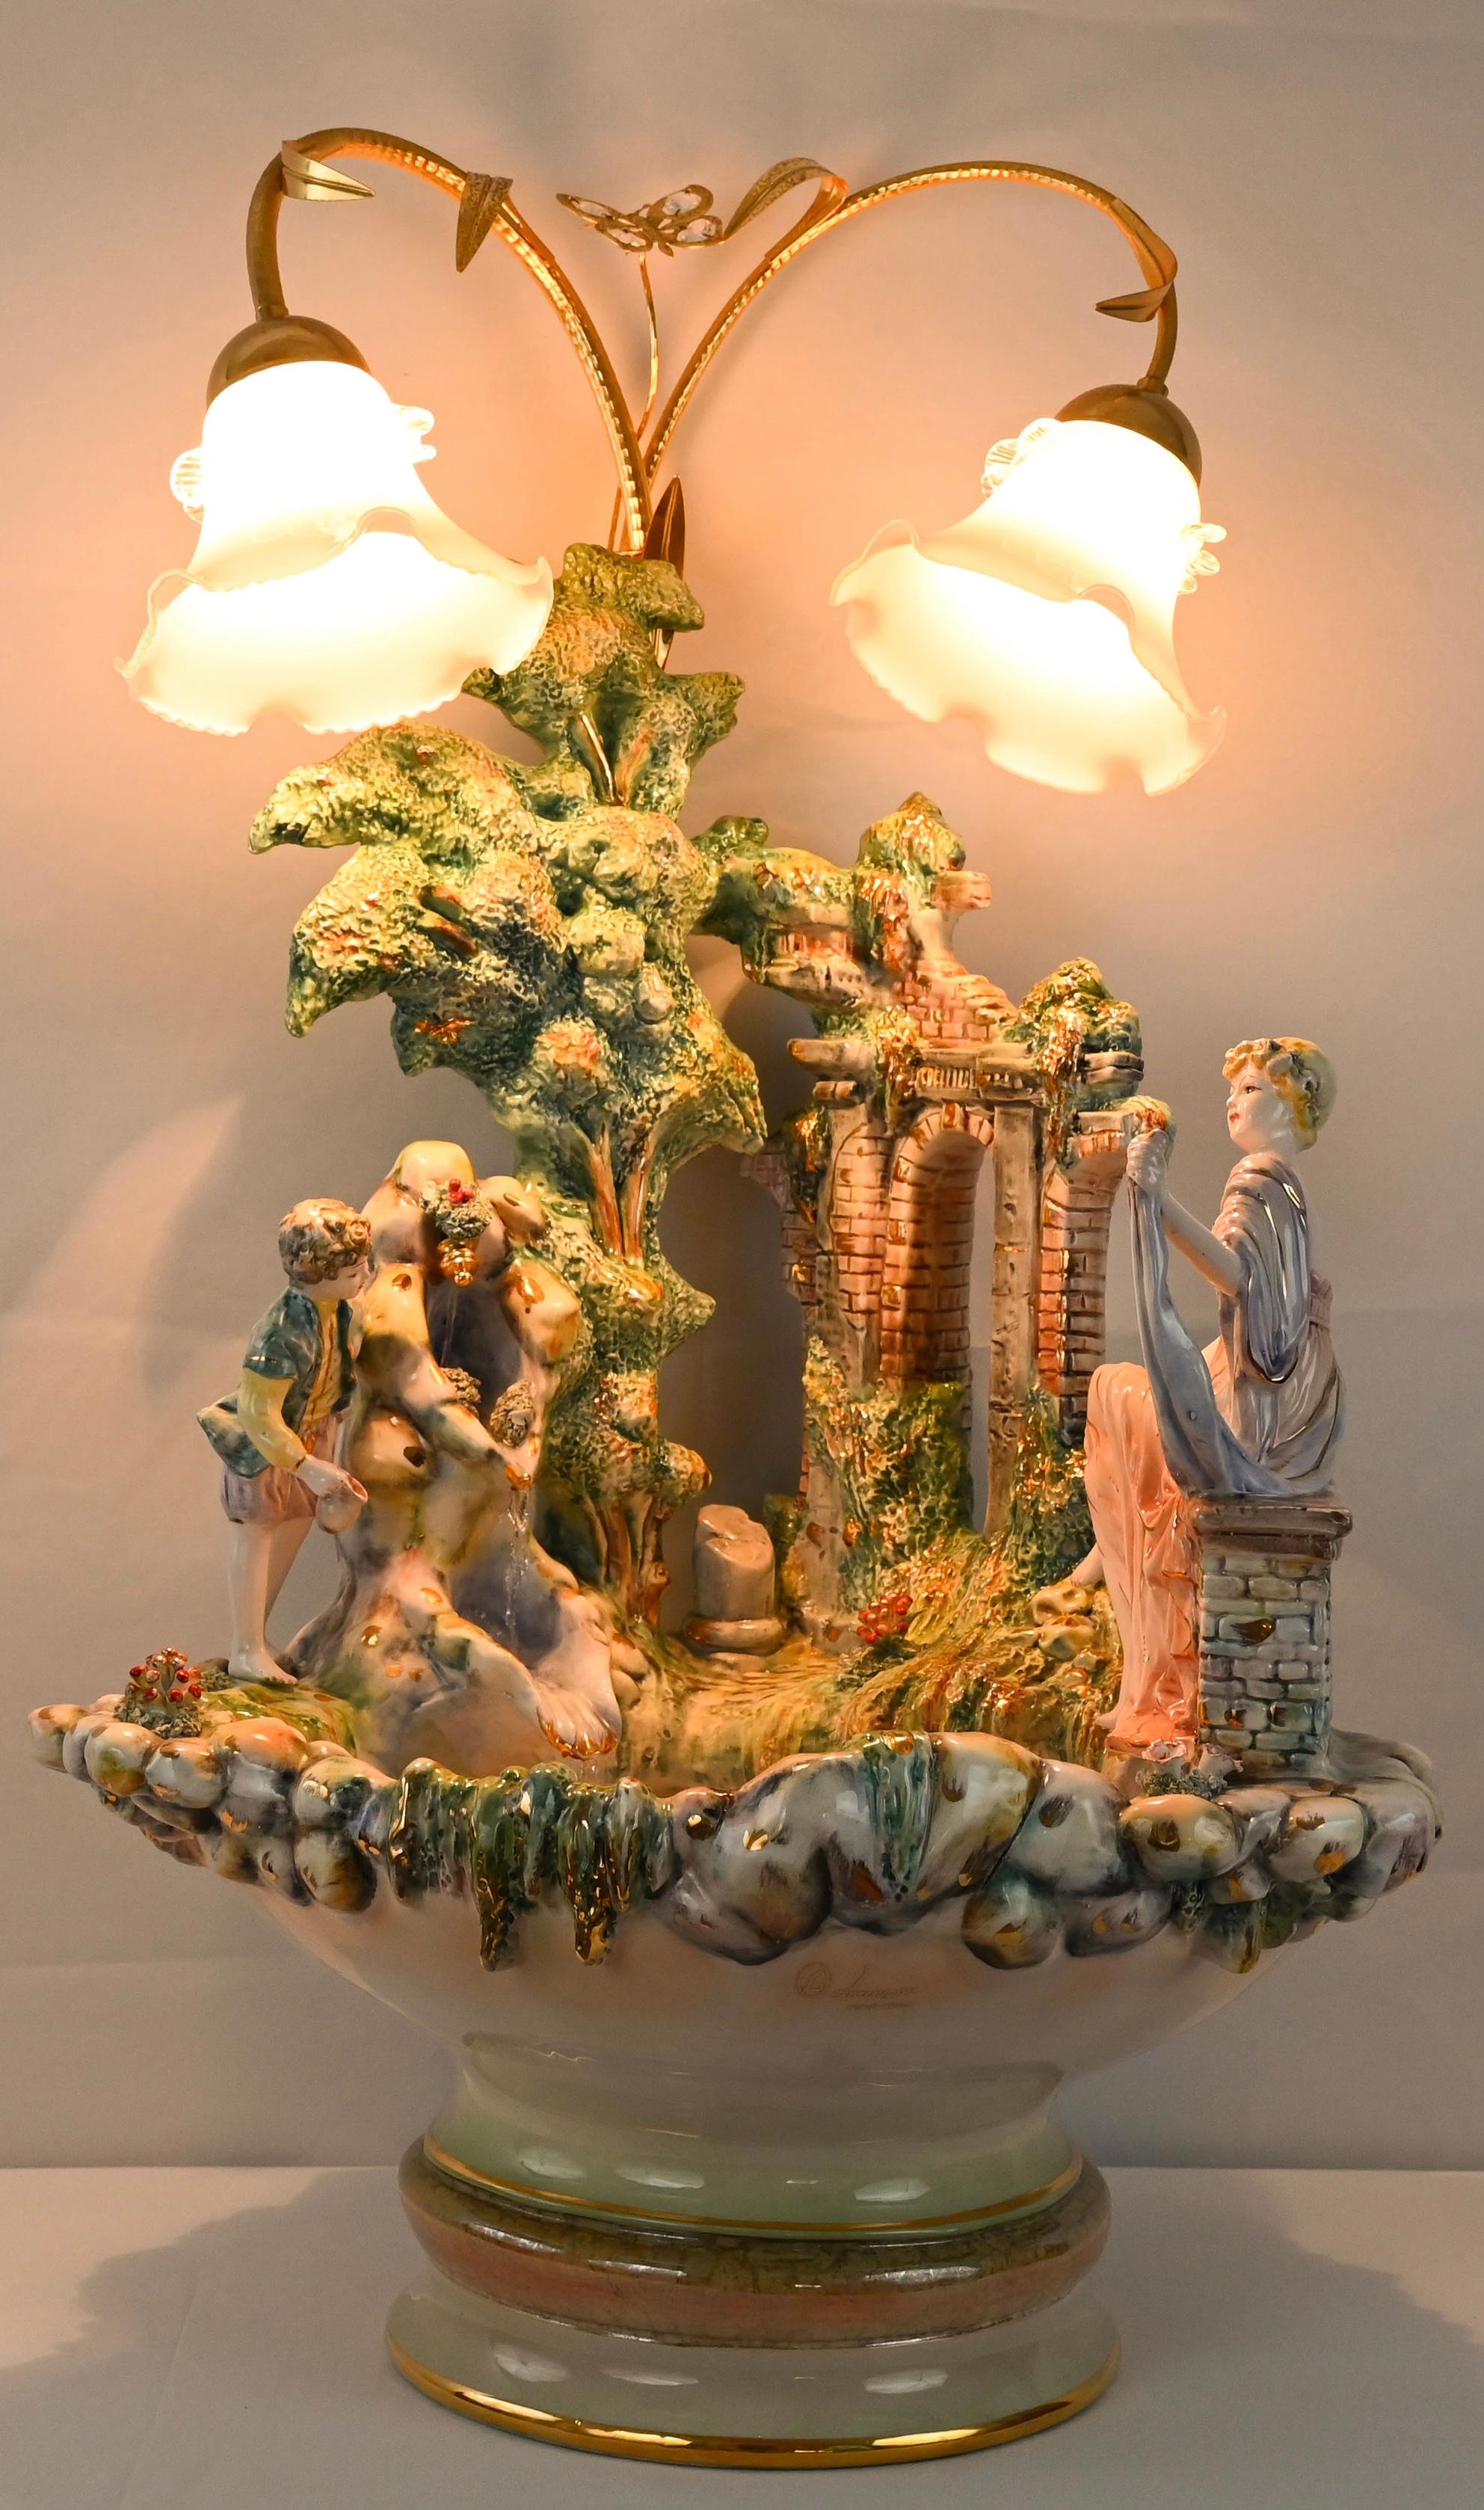 A very good quality Italian porcelain illuminated water fountain or bird bath comes in a scale that is perfect for any interior or exterior space. The lovely handcrafted porcelain is designed by Gianni Lorenzon. 

This delightfully decorative Gianni